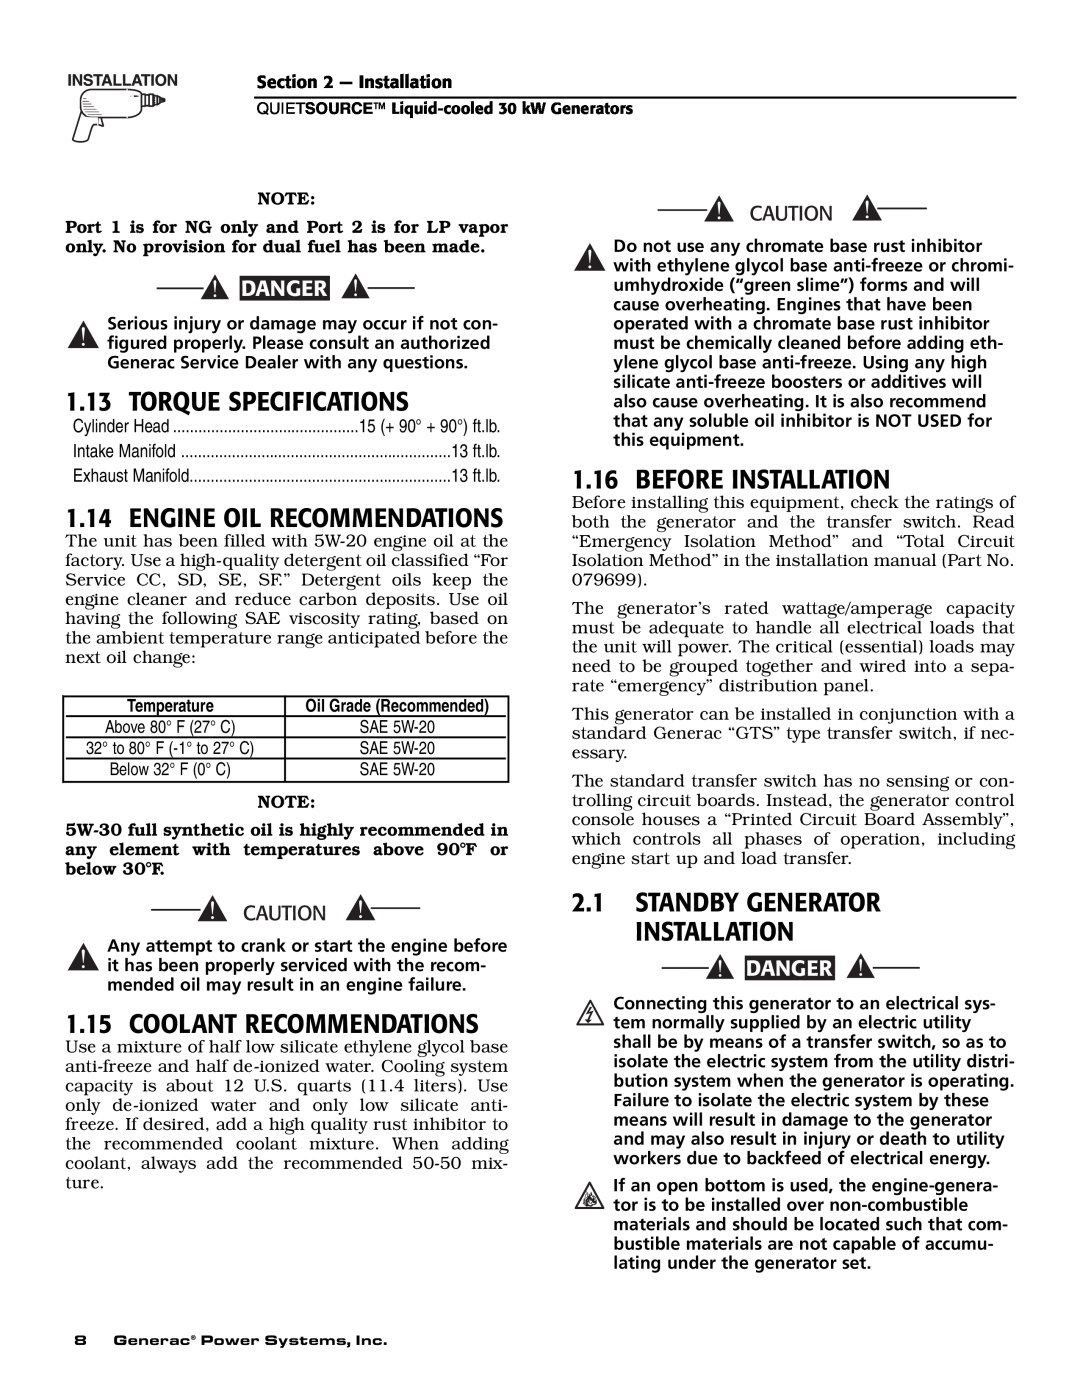 Generac Power Systems 004917-3 Torque Specifications, Engine Oil Recommendations, Before Installation, Danger, Temperature 